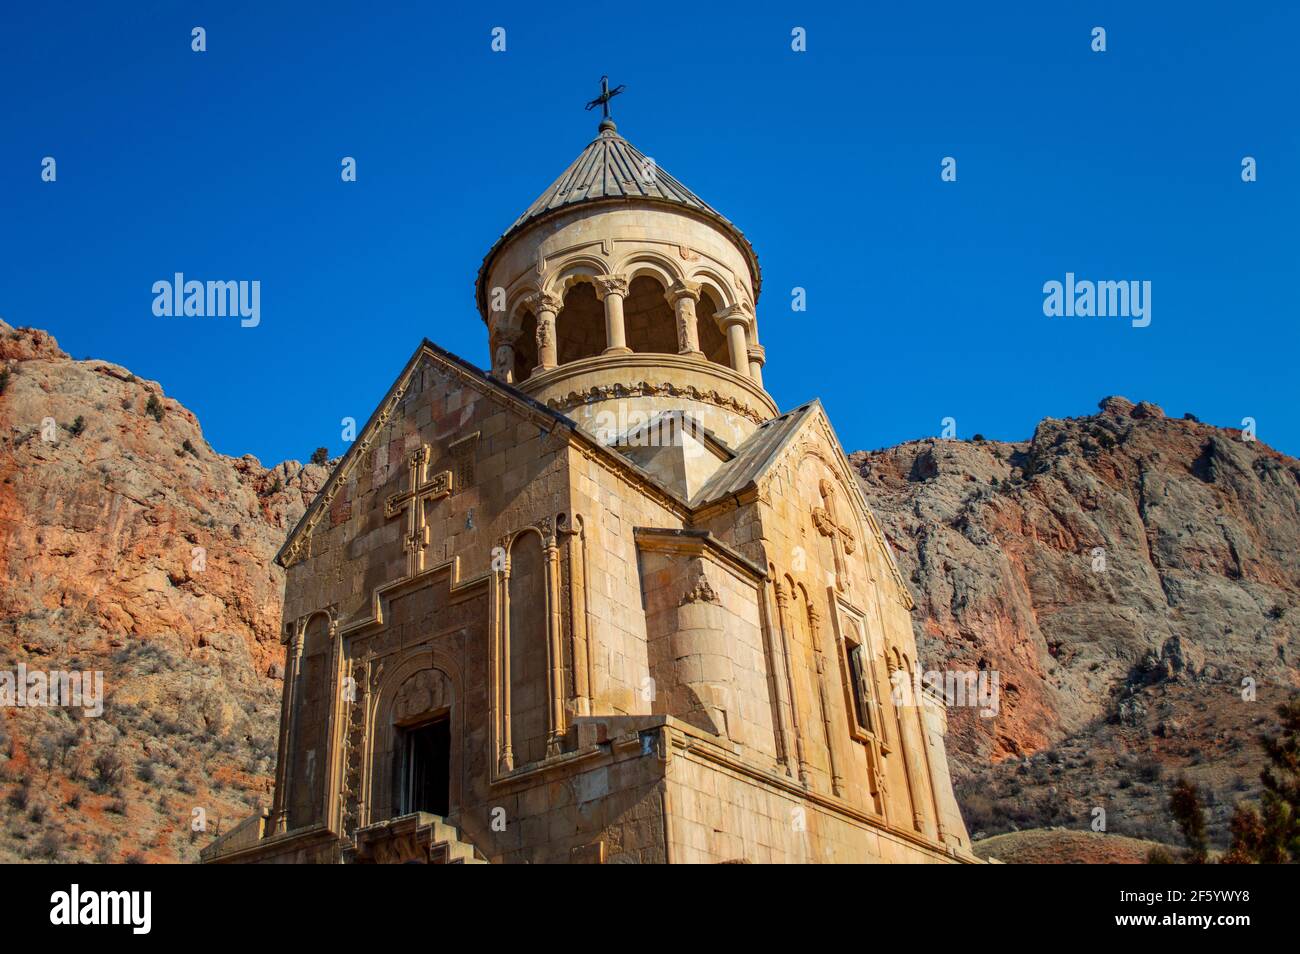 Burtelashen church, dedicated to Holy Mother of God, a famous medieval Armenian church in Noravank monastery complex of Armenia Stock Photo